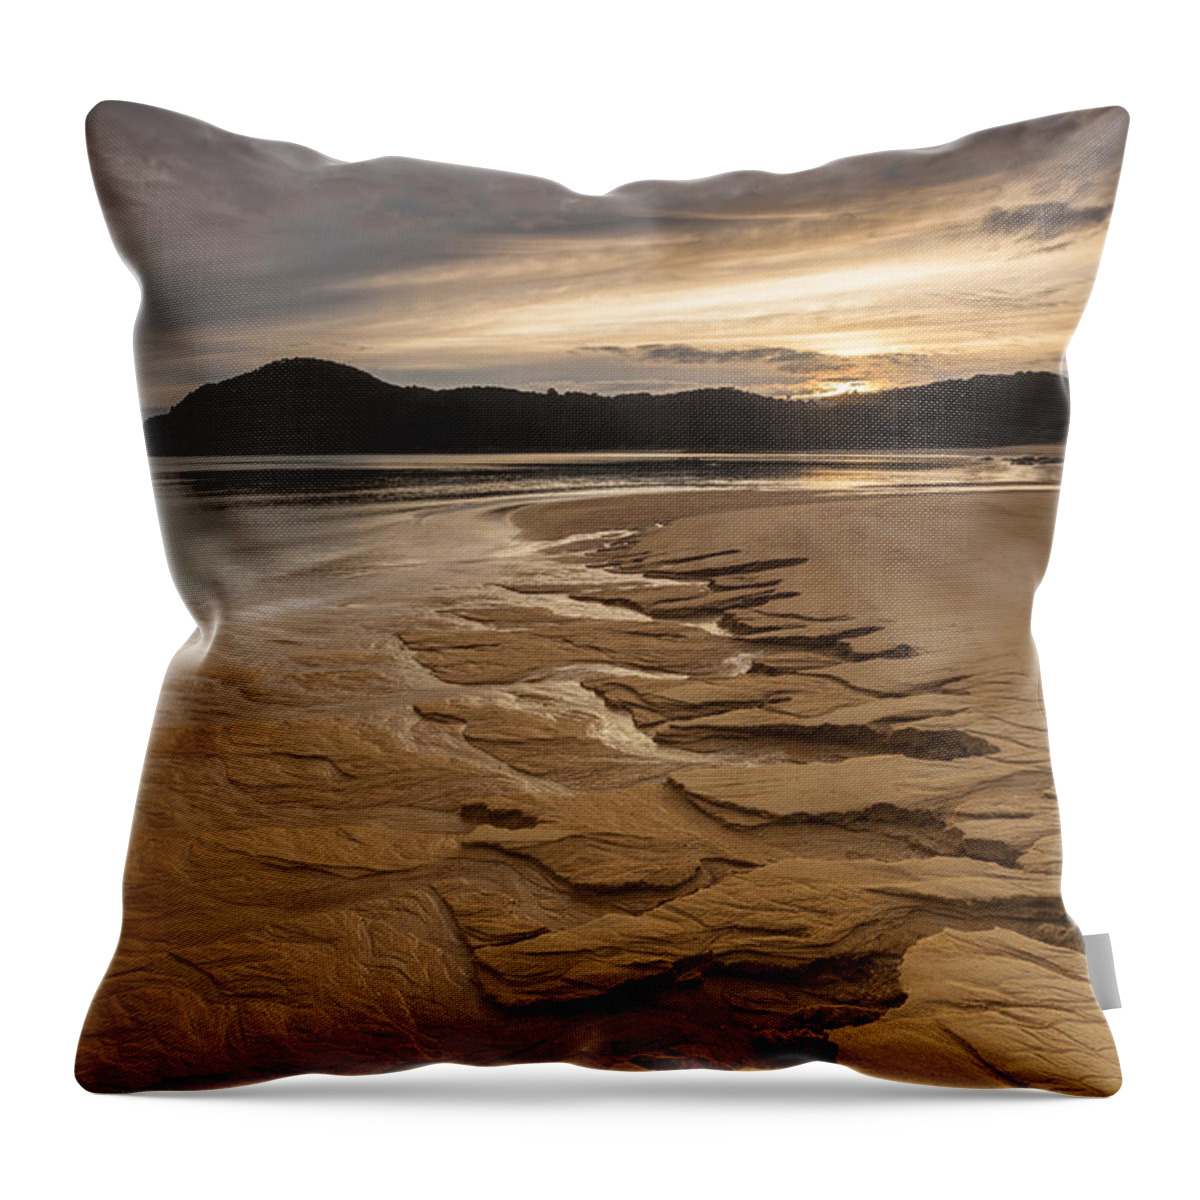 530819 Throw Pillow featuring the photograph Beach Pattern At Sunrise Anchorage Bay by Colin Monteath